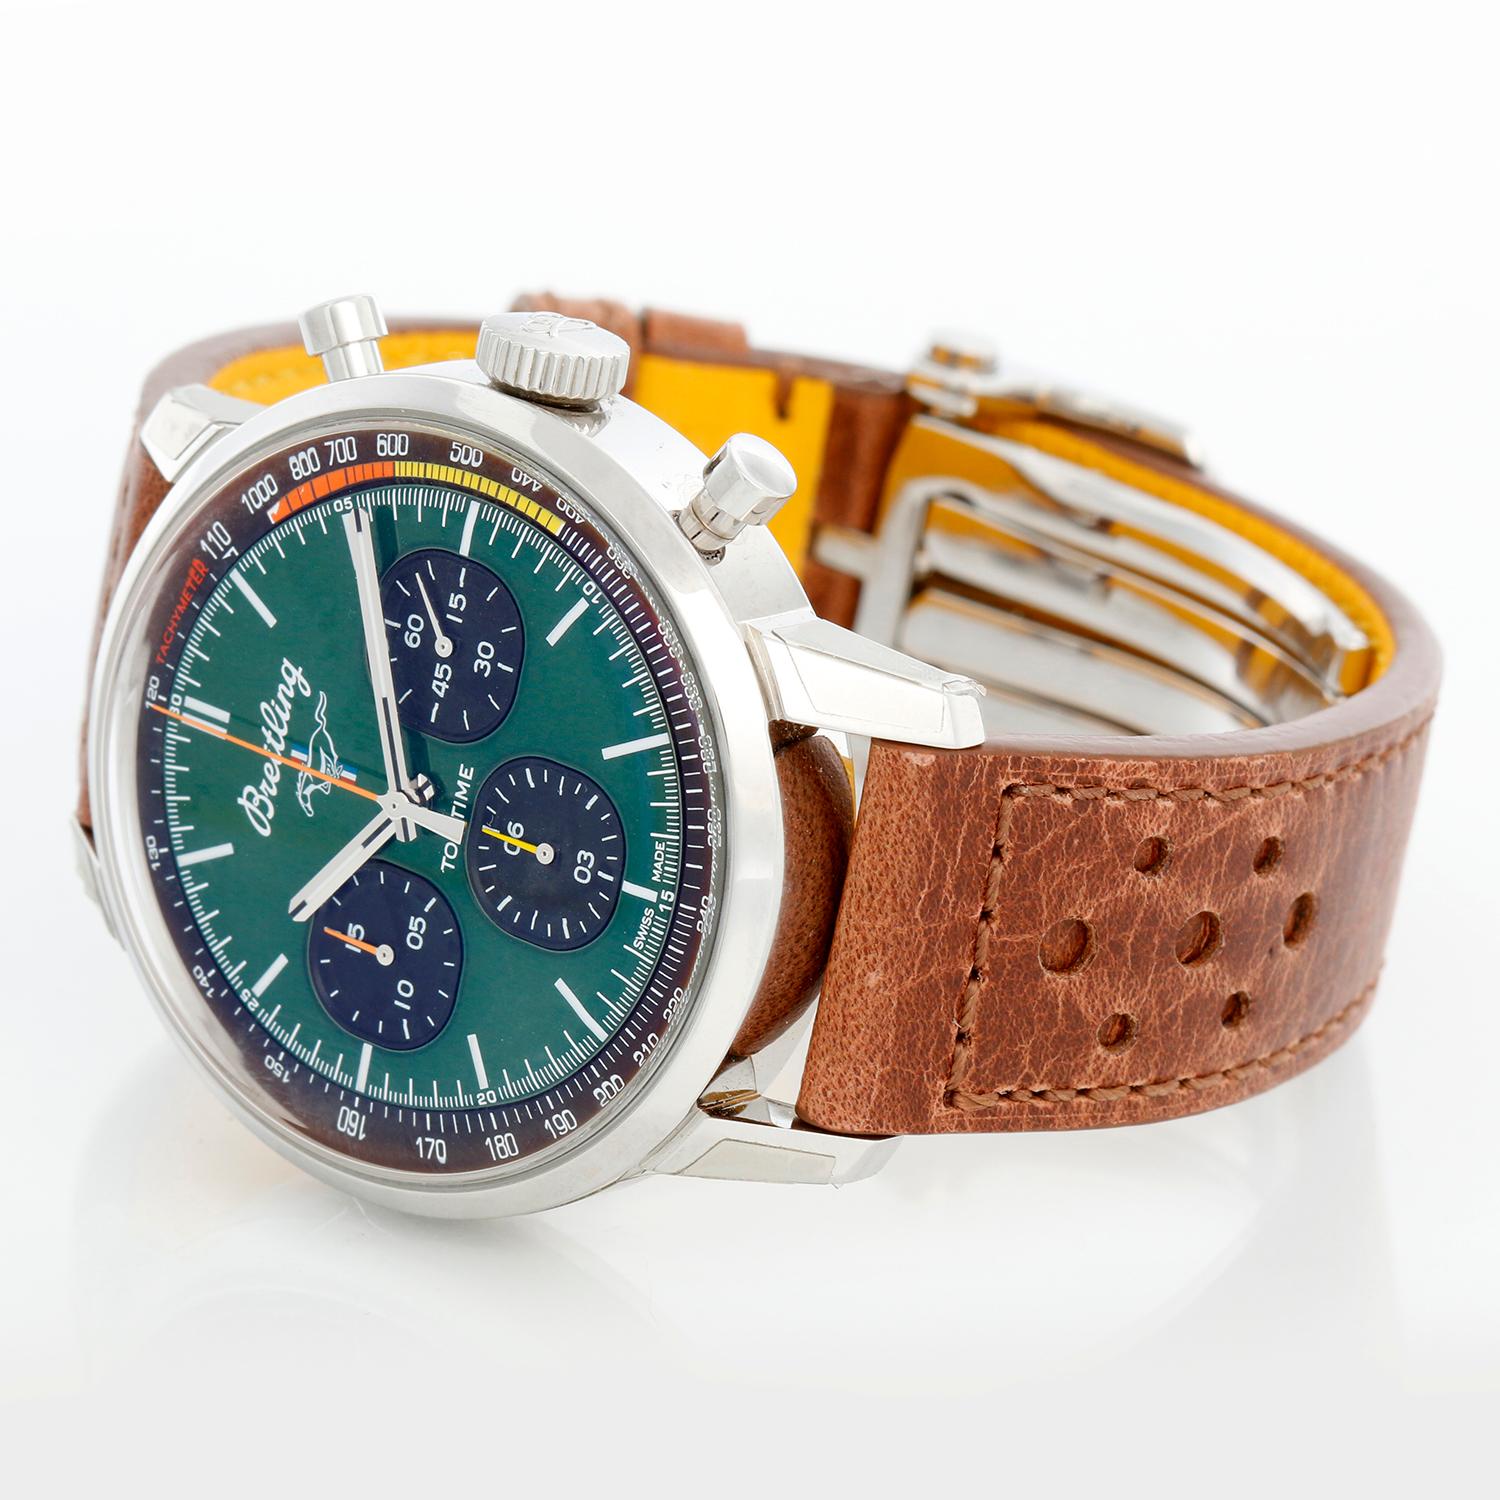 Breitling Top Time Ford Mustang Men's Watch Ref A25310 - Automatic winding chronograph. Stainless steel case (42 mm). Green dial with black subdials. Brown racing calfskin leather strap with Breitling Stainless Steel Deployant buckle. Pre-owned with